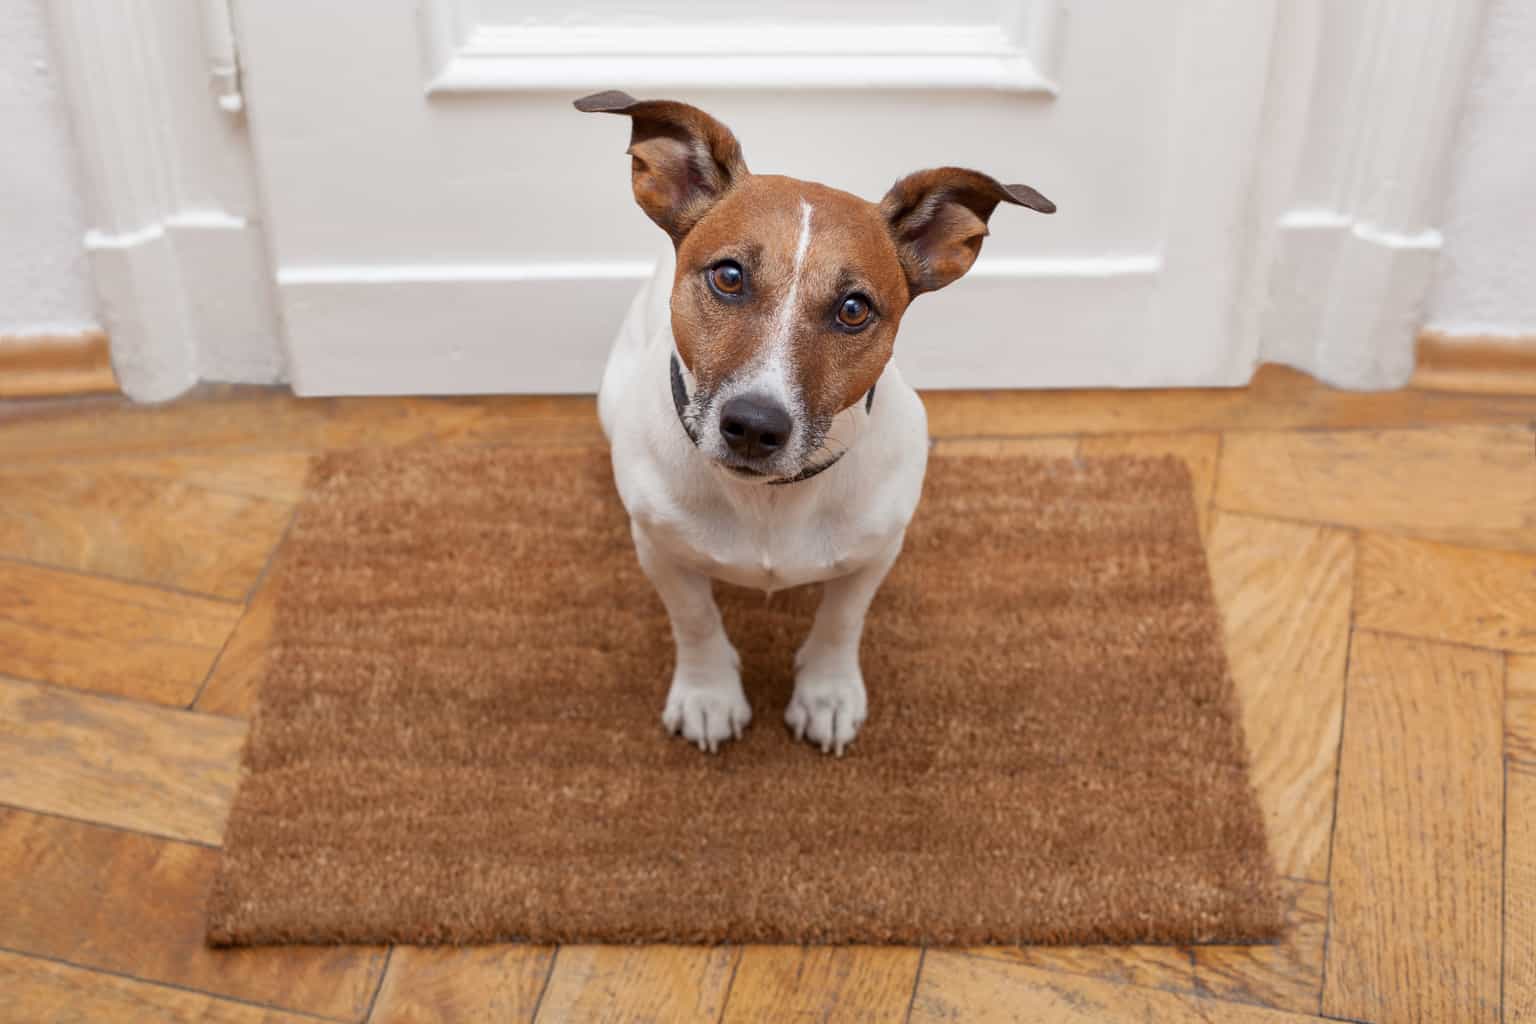 How to Fix a Door Frame Chewed by a Dog (Best Methods)